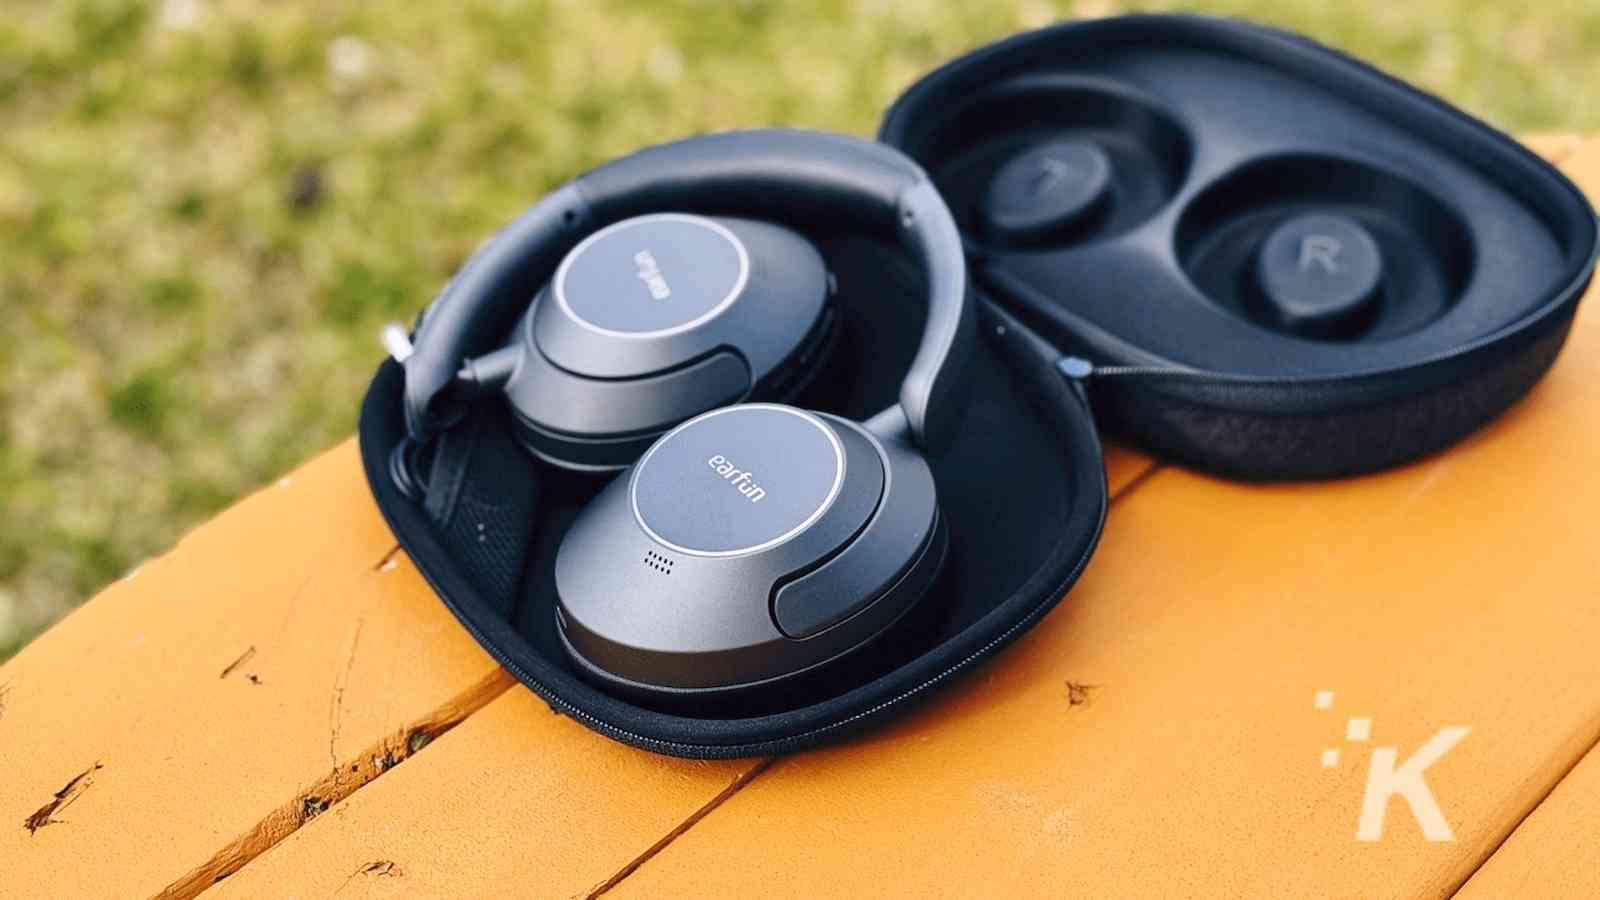 A pair of black over-ear headphones placed partially inside an open, black carrying case on a yellow wooden bench.